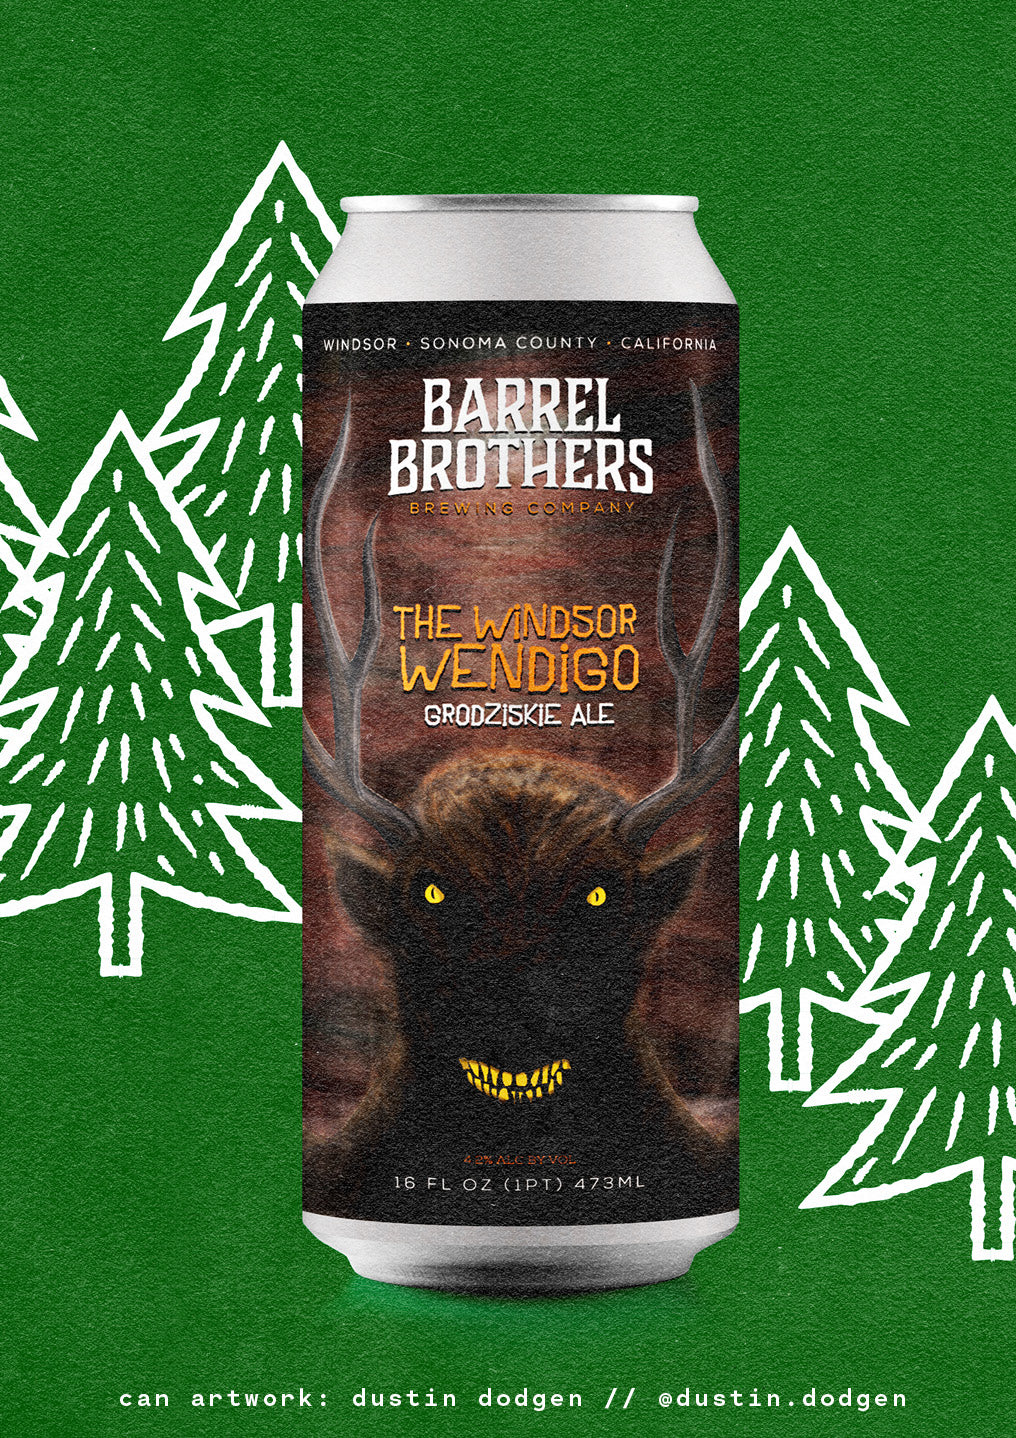 the windsor wendigo by barrel brothers brewing coompany